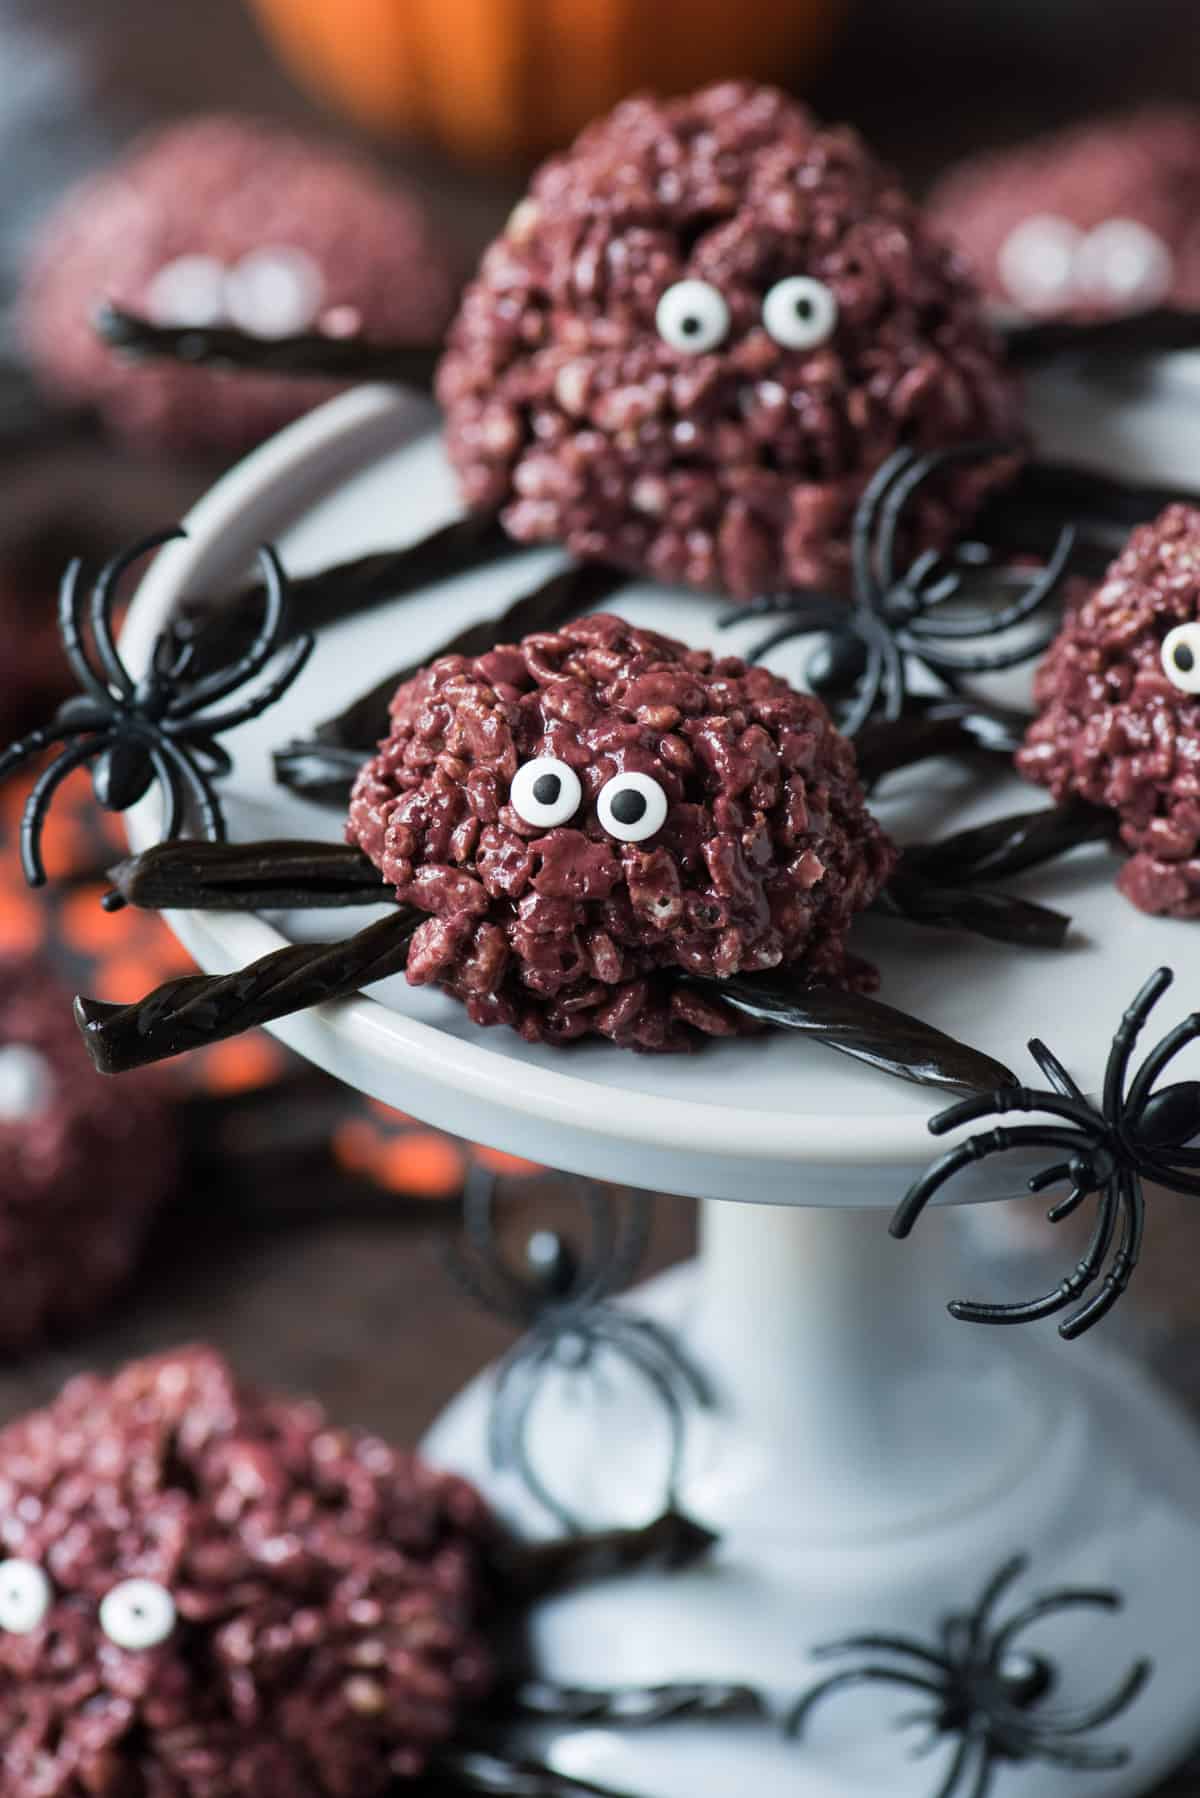 purple spider rice krispie treats with black licorice legs on a gray serving stand 